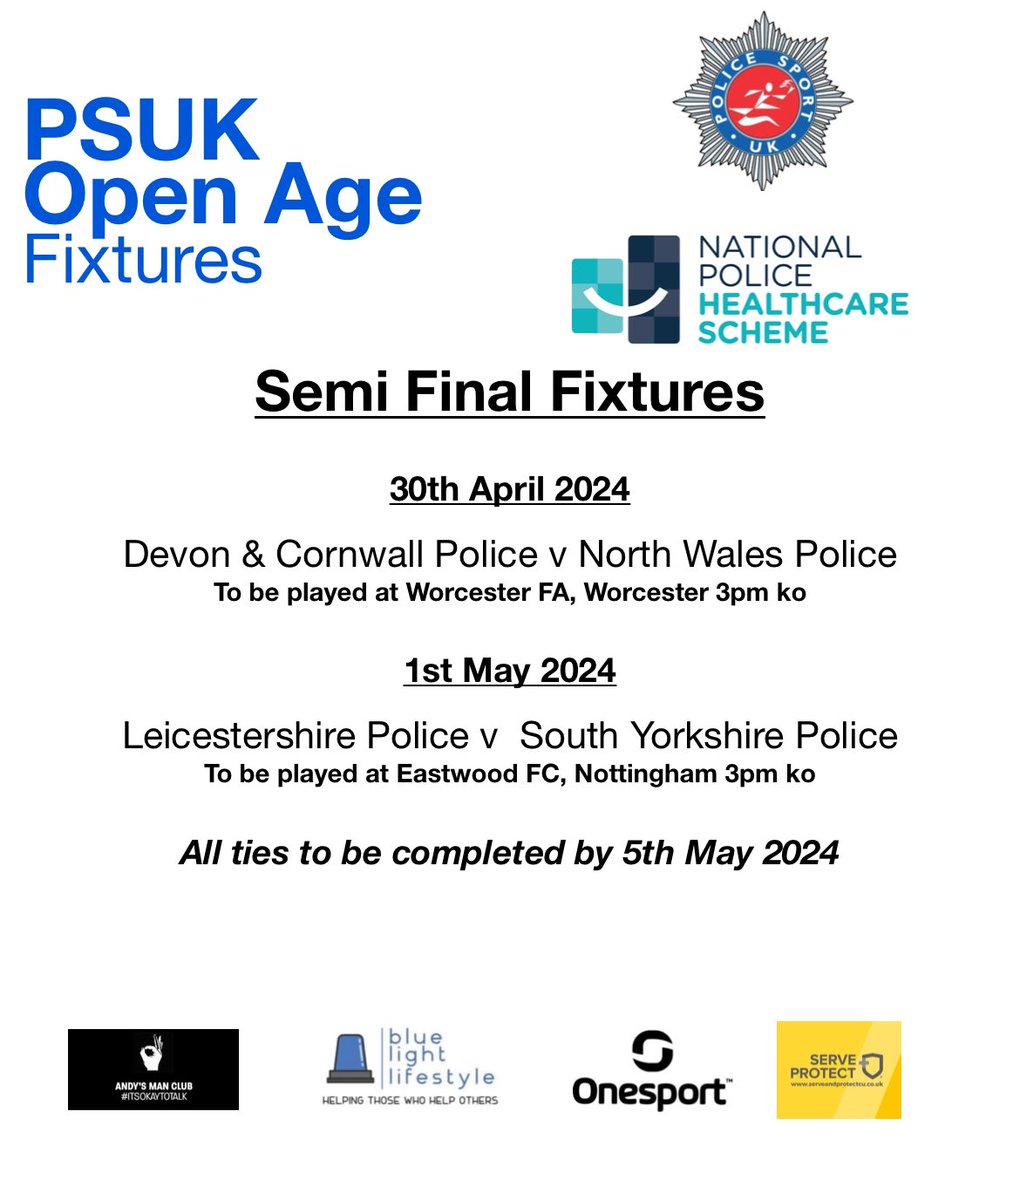 The @PSUKMenFootball National Police Healthcare Scheme Open Age Semi Finals @DC_Police v @NWPolice Tuesday 30th April 2024 @WorcesterCityFc with a 3pm ko @leicspolice v @syptweet Wednesday 1st May 2024 @EastwoodCFCV2 with a 3pm ko Good luck to the final 4 #roadtosouthshields